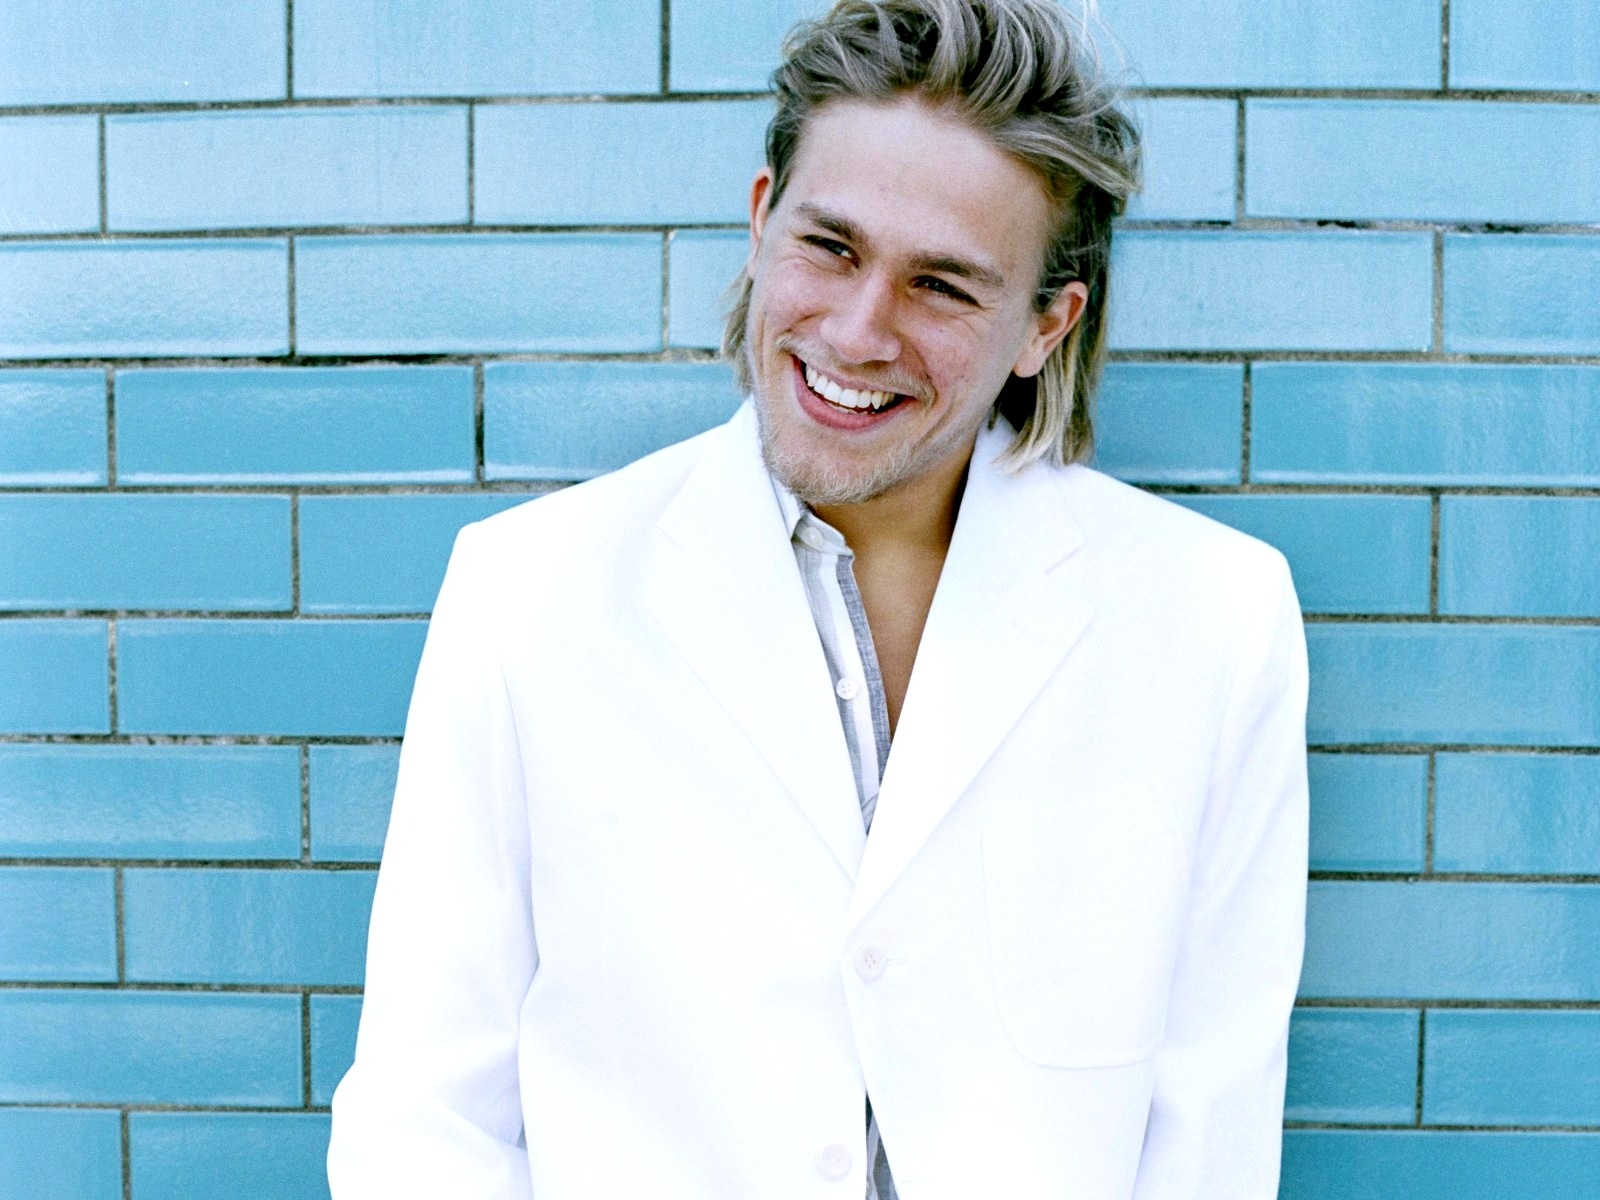 Wallpaper actor celebrity jacket person professional profession charlie hunnam white collar worker x